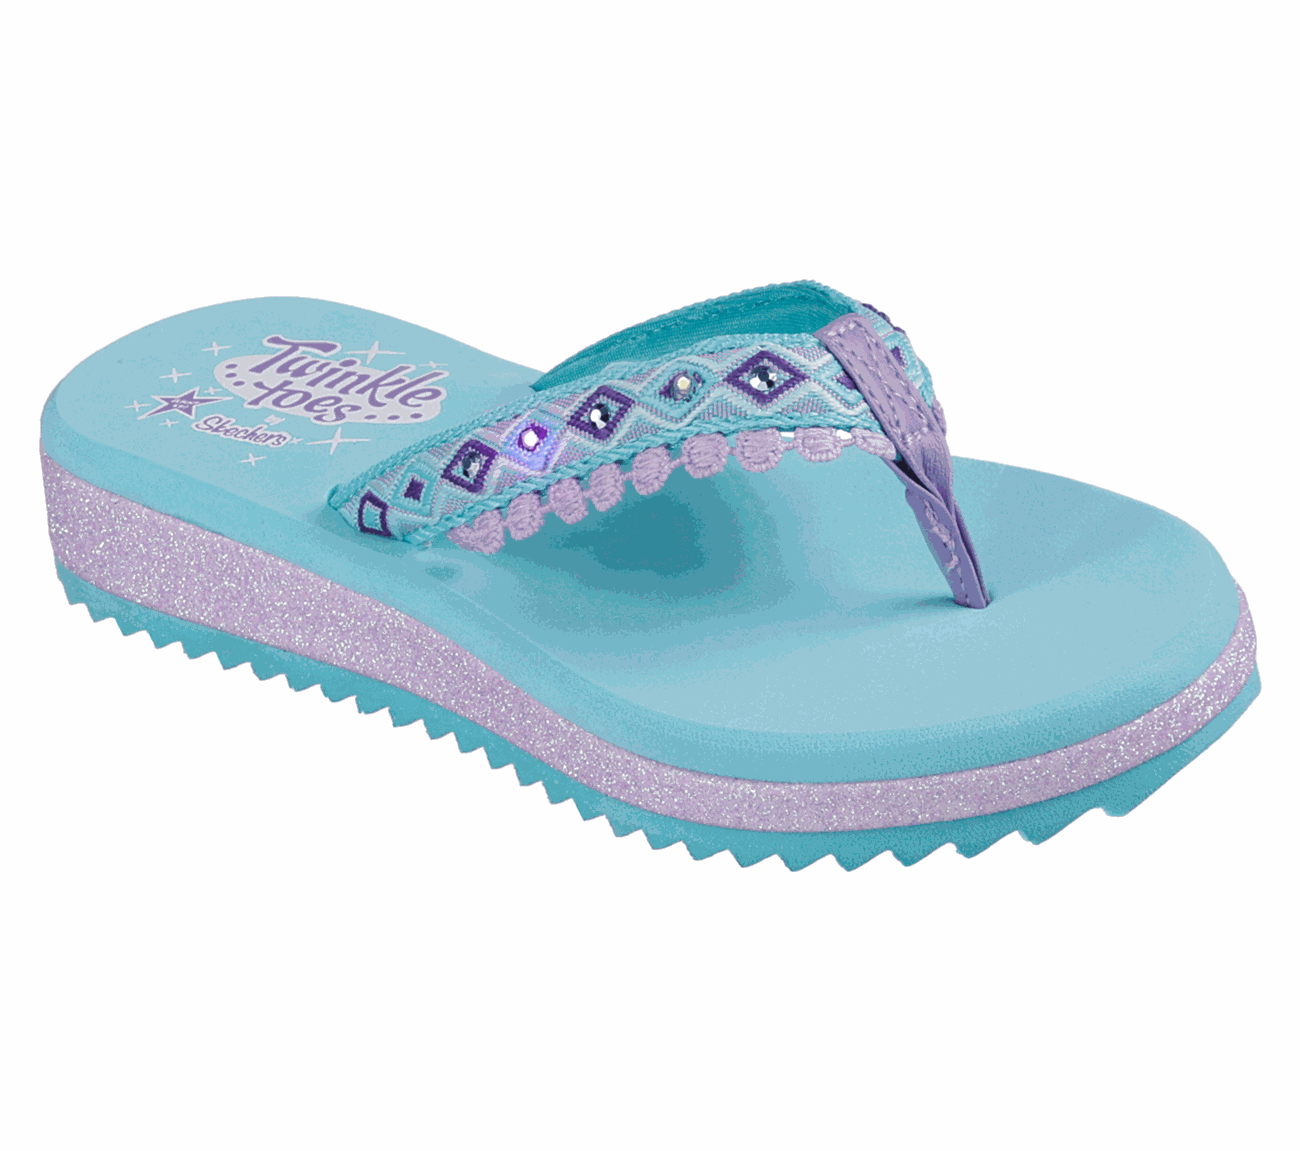 twinkle toes slippers